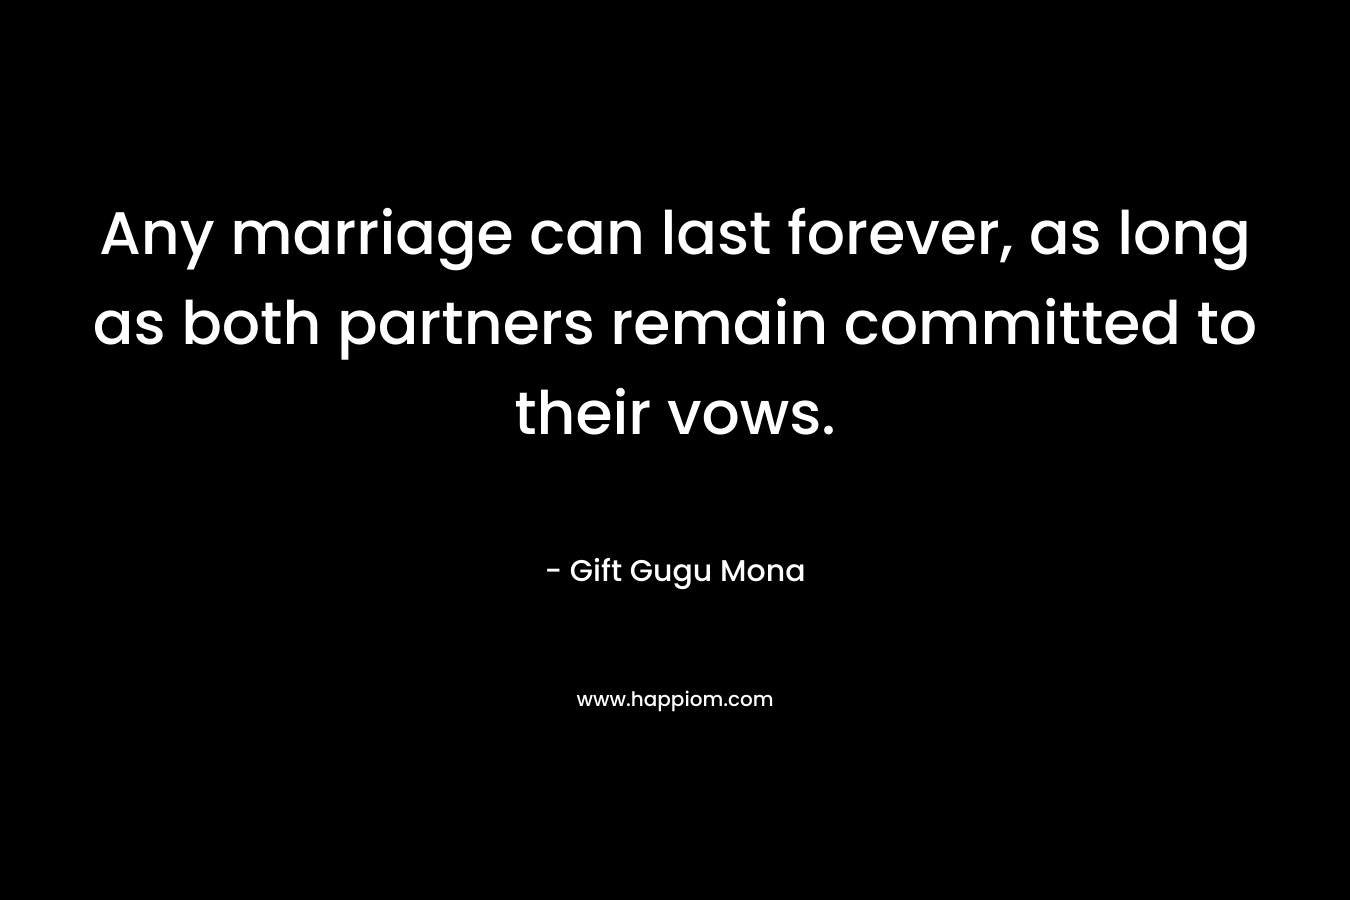 Any marriage can last forever, as long as both partners remain committed to their vows.